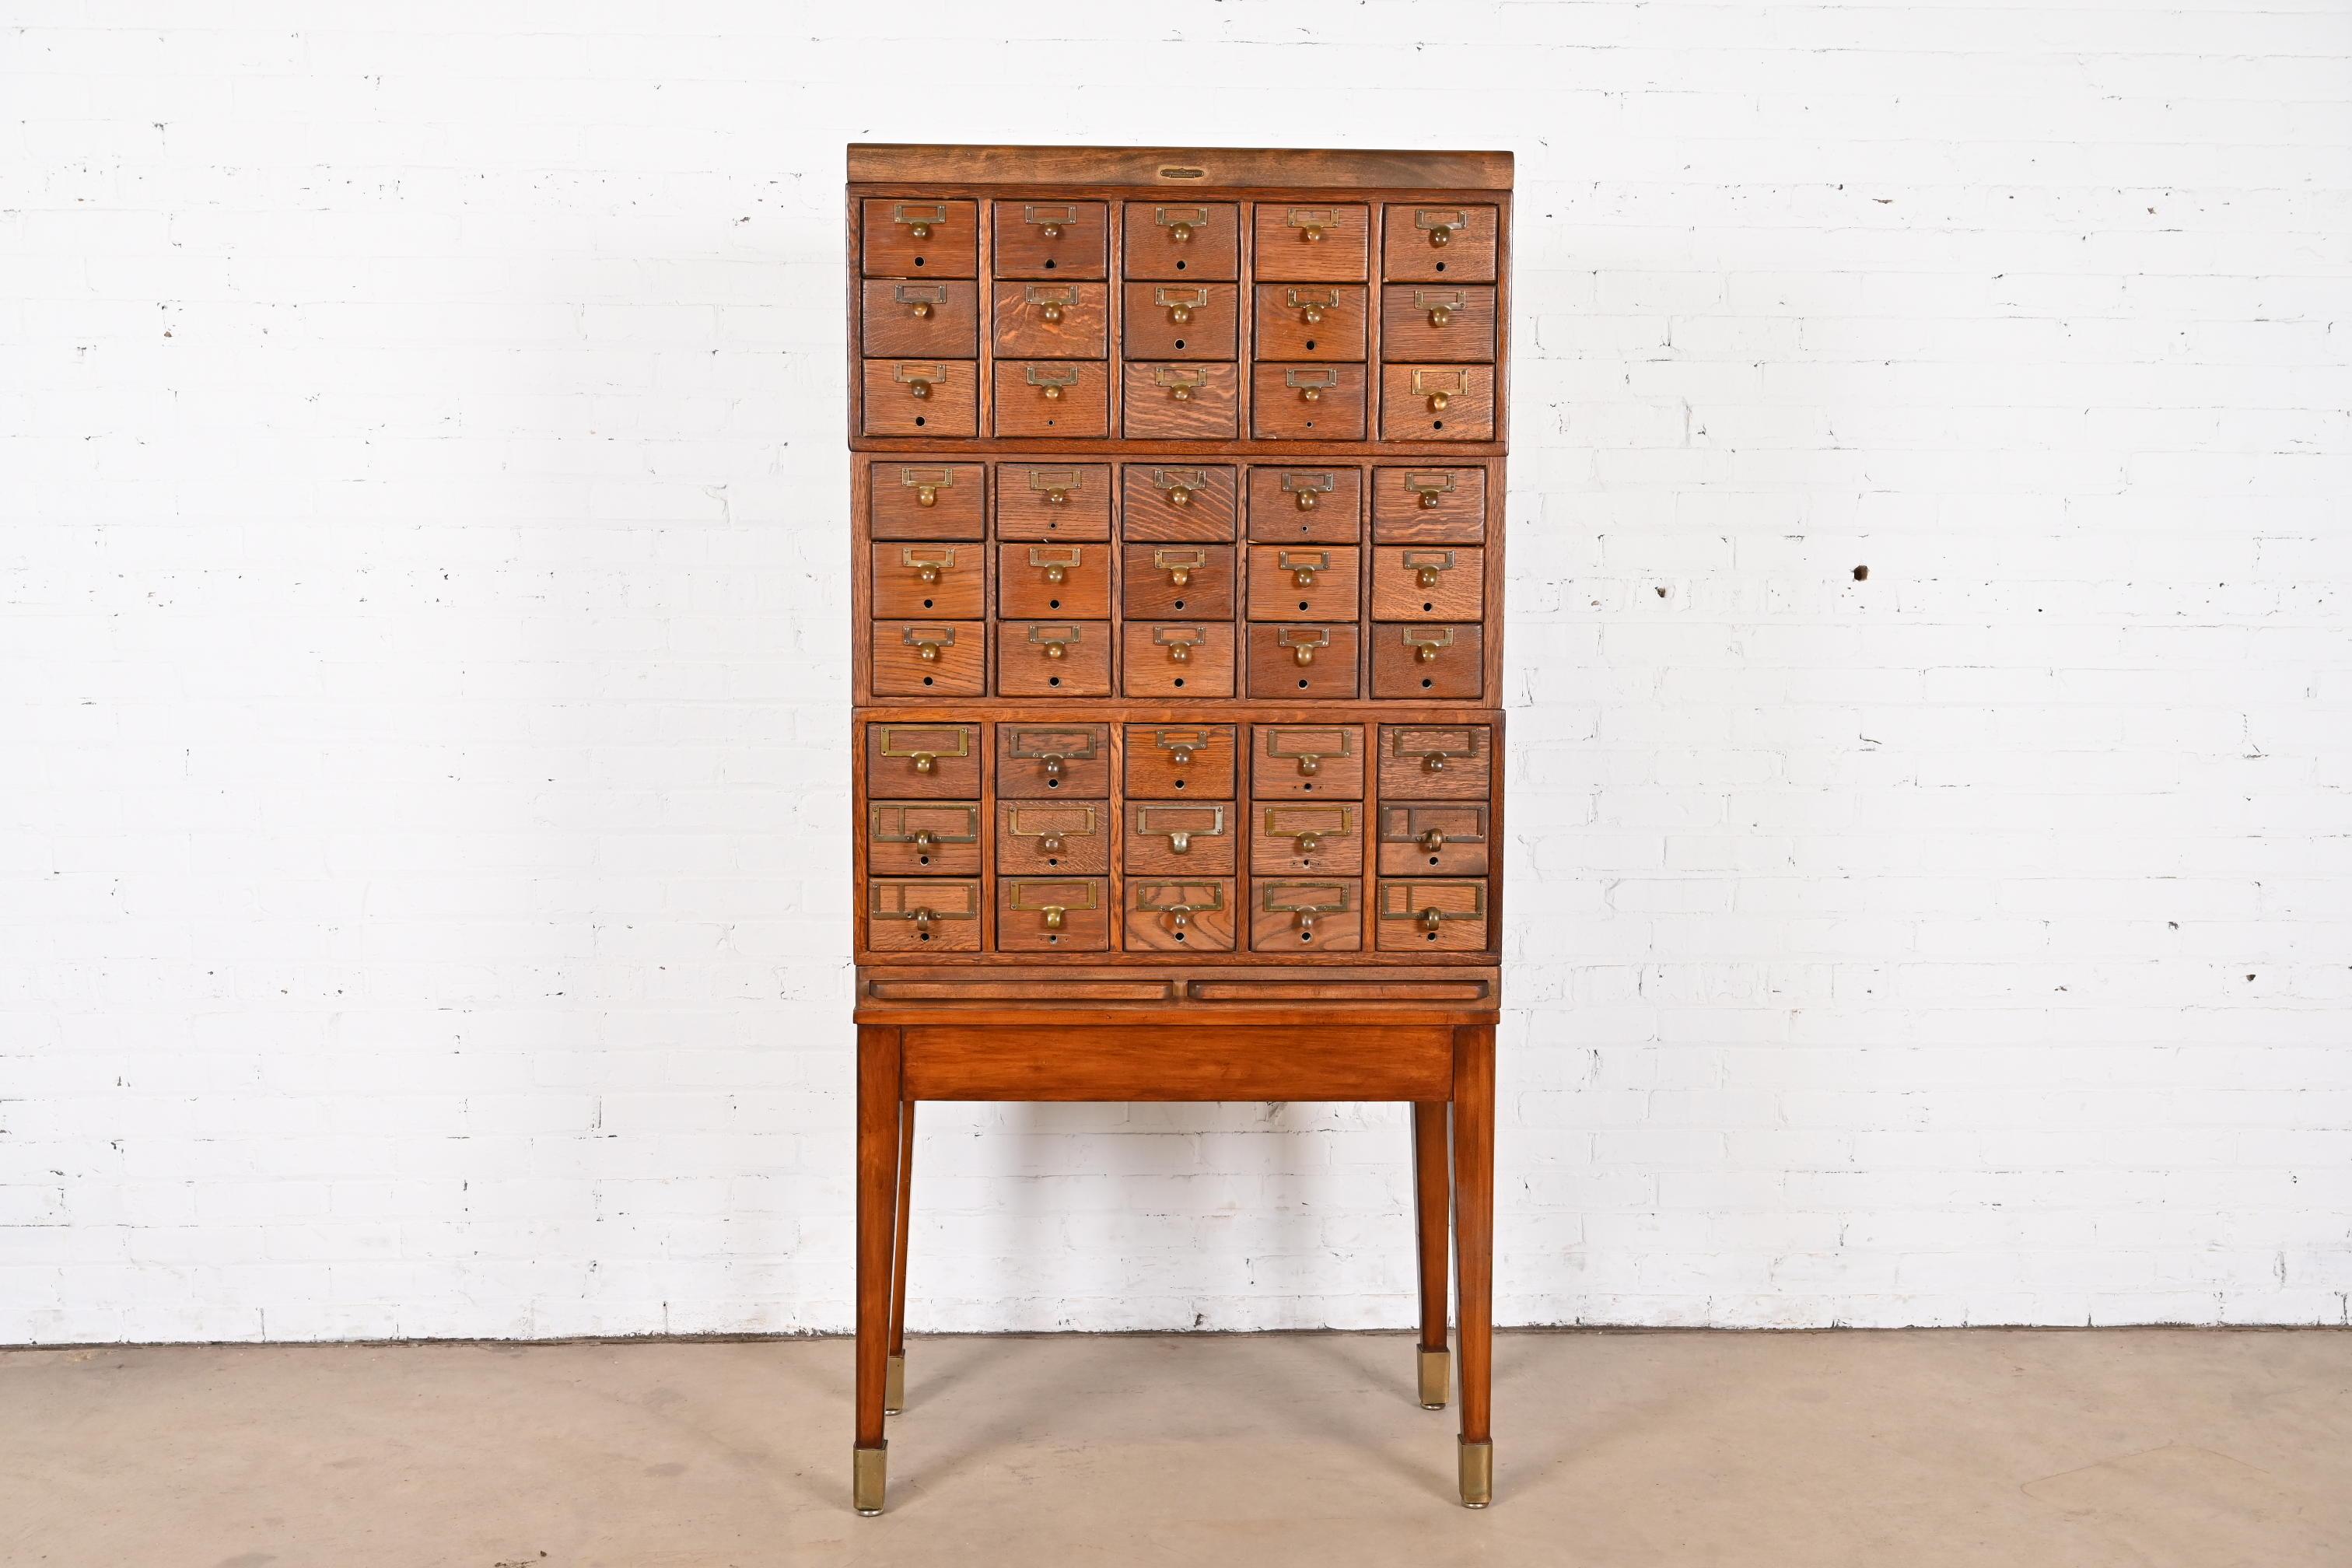 A rare and exceptional antique Arts & Crafts 45-drawer card catalog or file cabinet with two pull-out writing tablets

By Remington Rand

USA, Early 20th Century

Beautiful quarter sawn oak and mahogany, with brass hardware.

Measures: 33